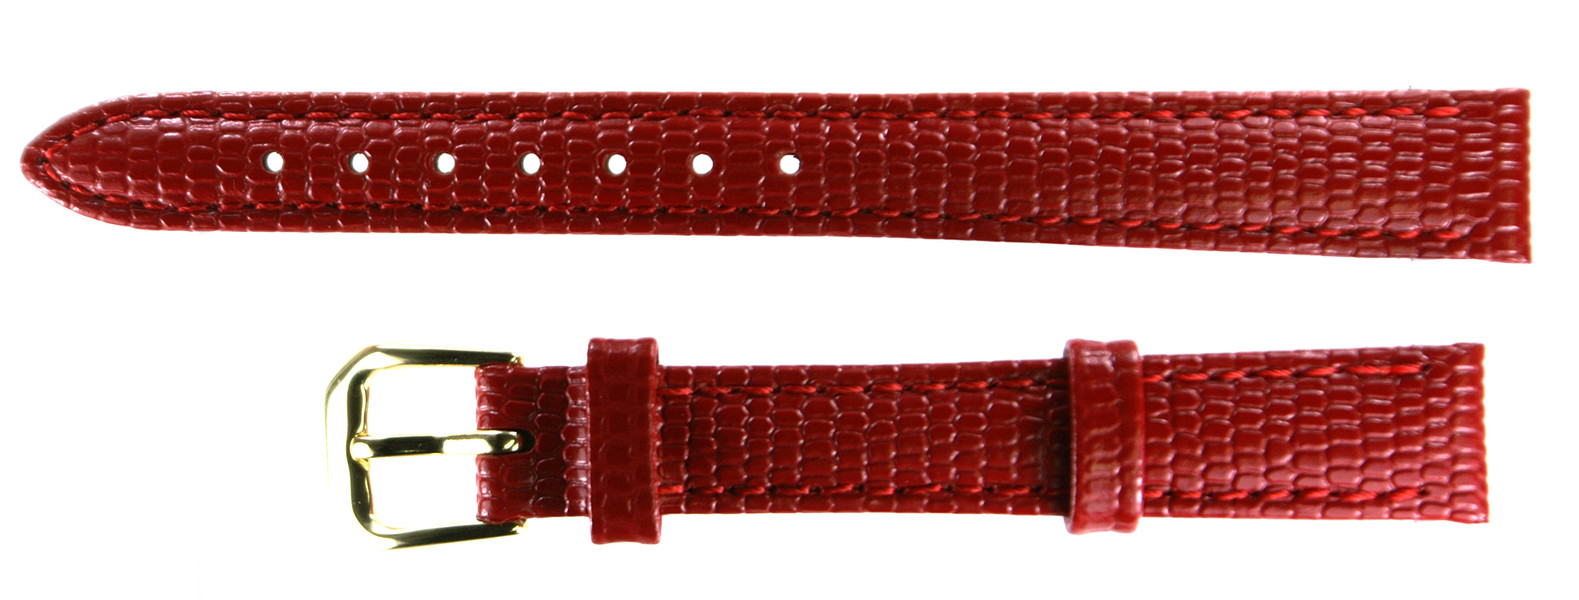 Lizard type clock band made in condor company 12mm (RED) - Click Image to Close